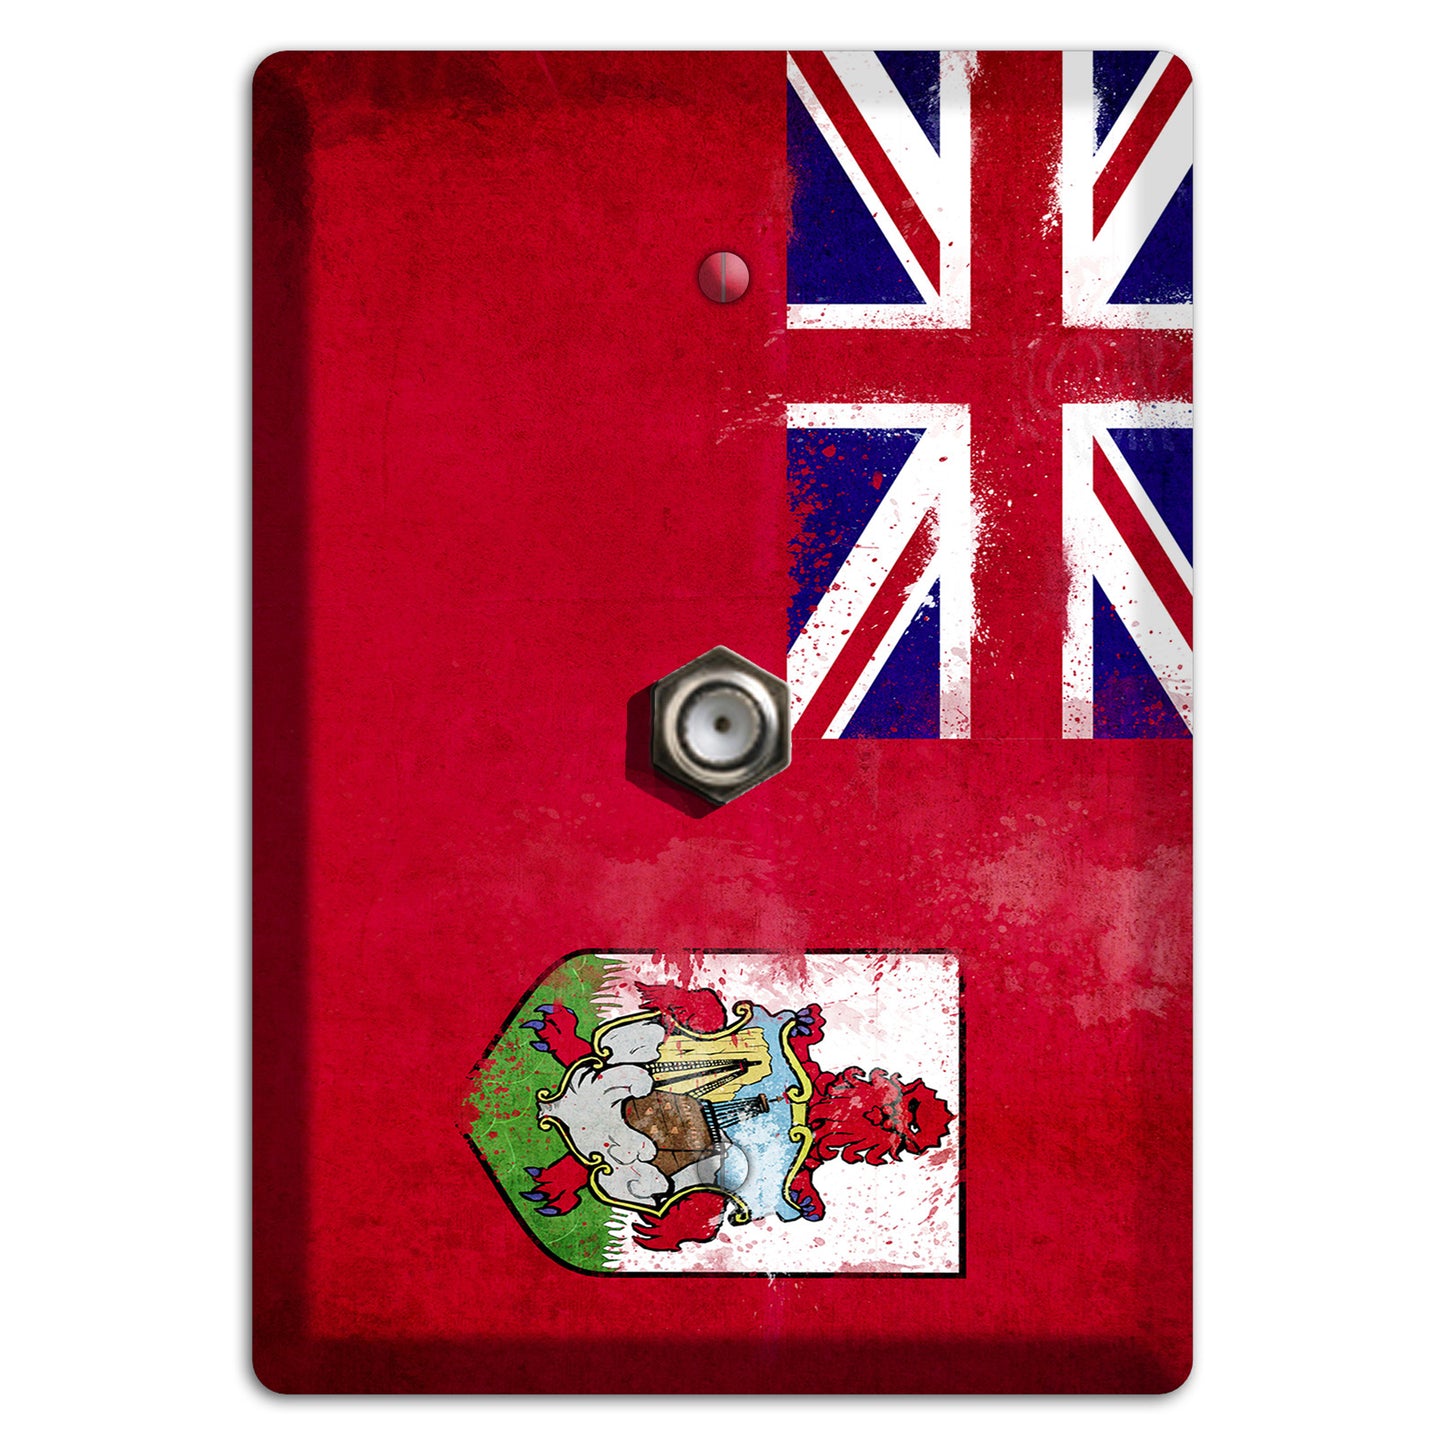 Bermuda Cover Plates Cable Wallplate